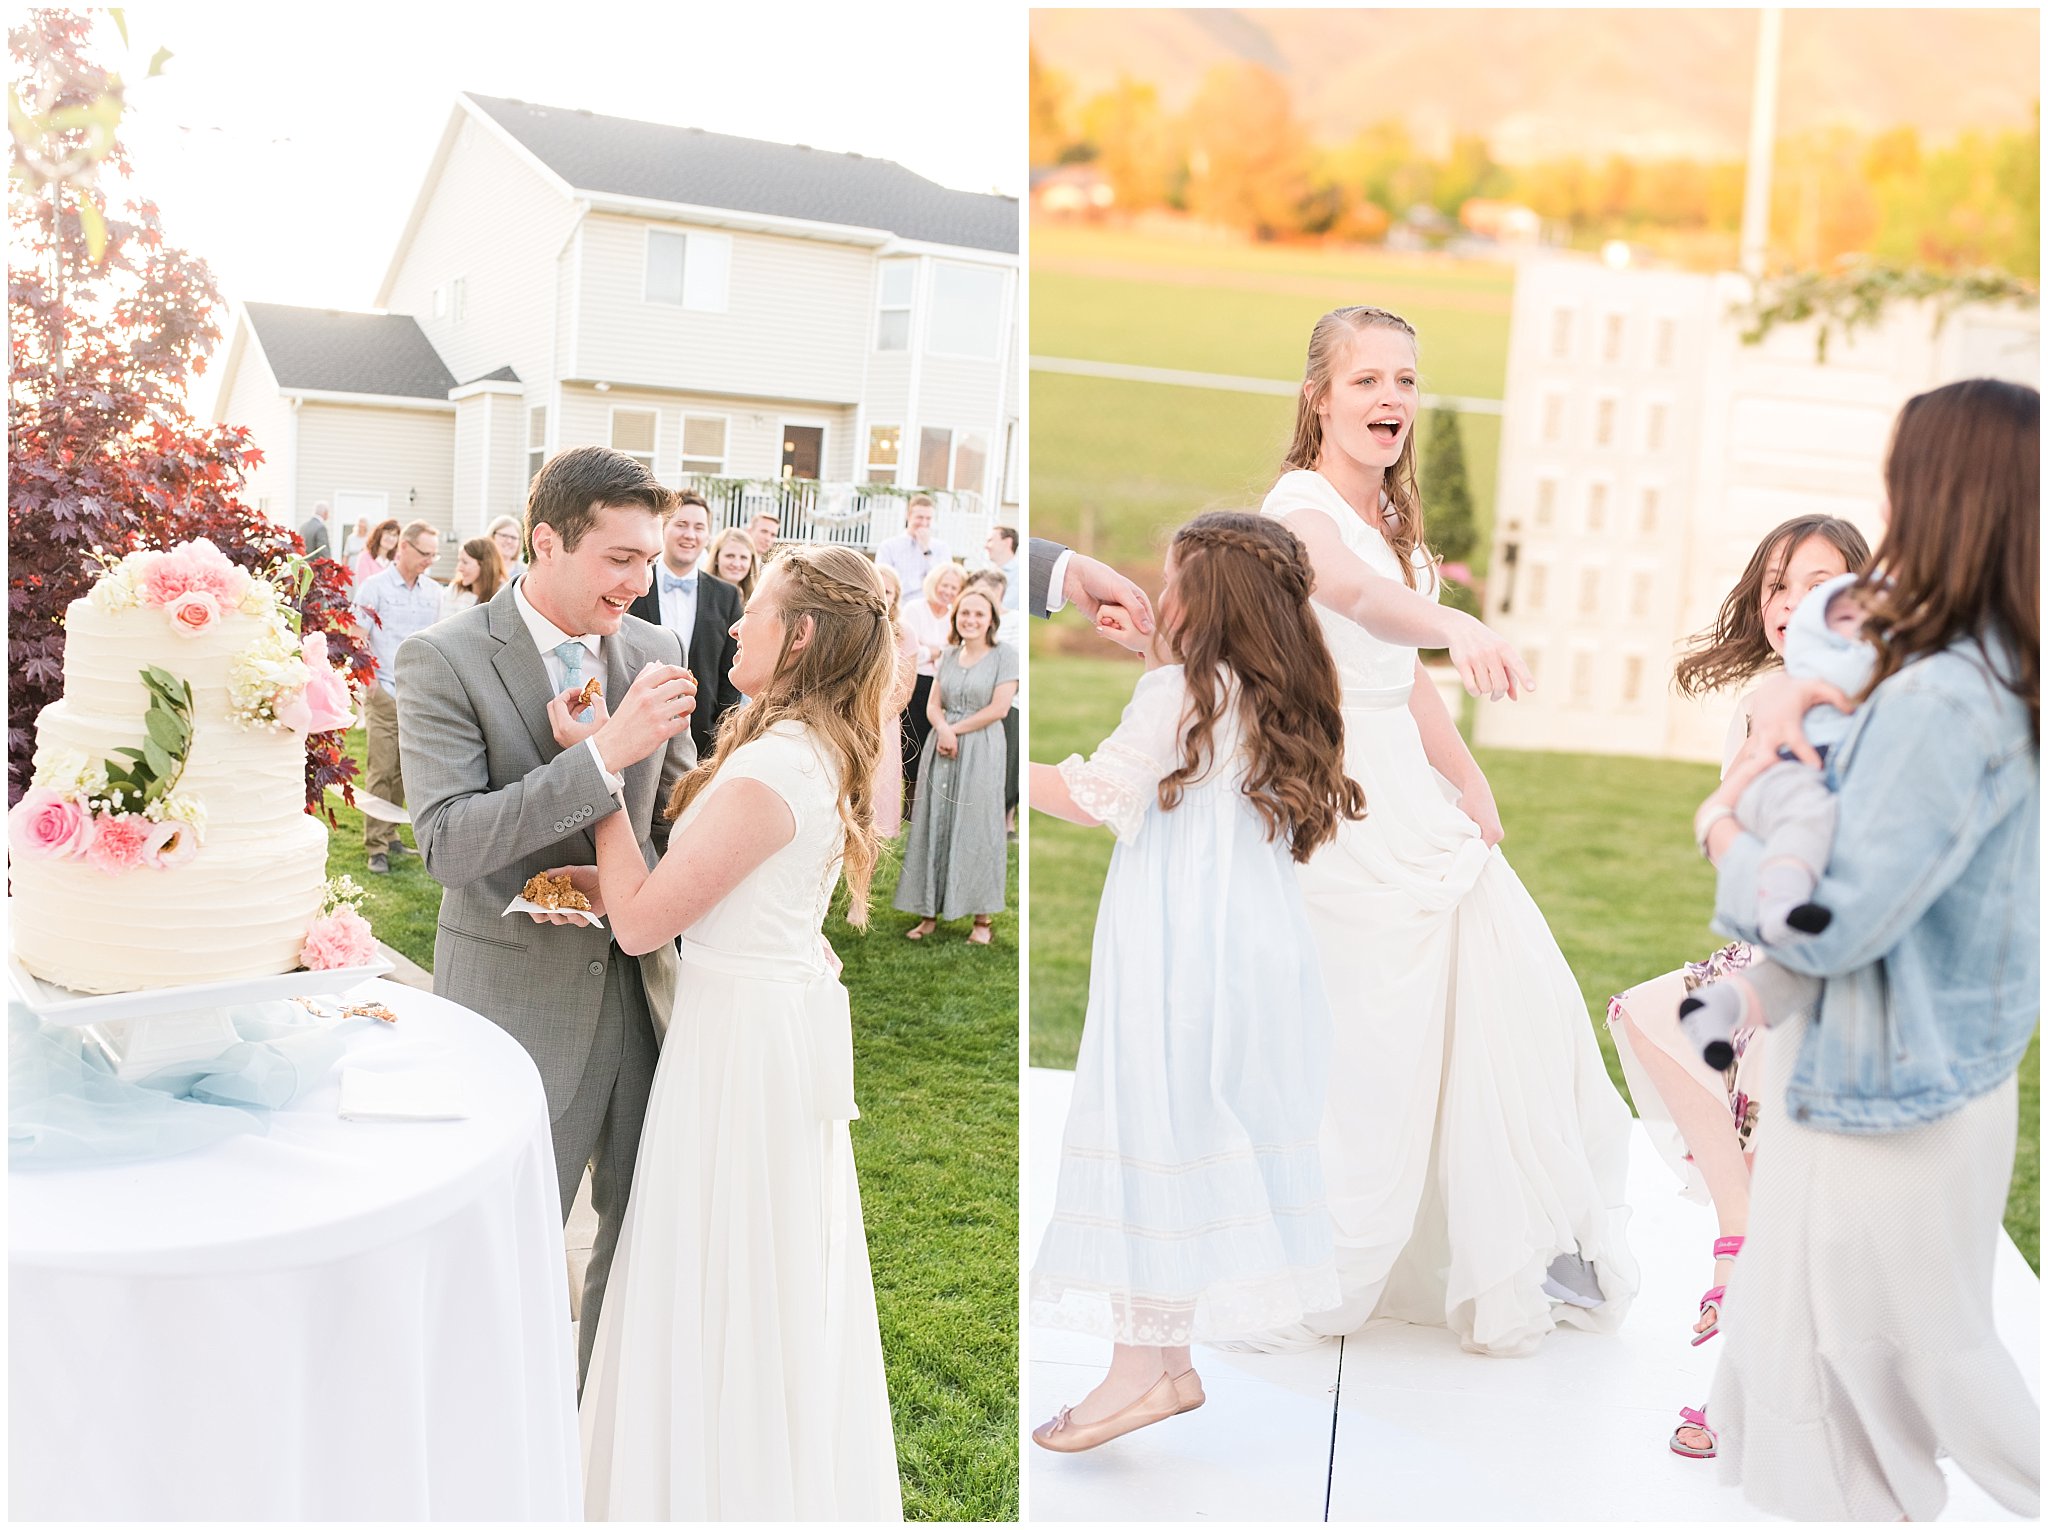 Bride and groom cake cutting | Backyard outdoor spring wedding with grey, blush, and light blue wedding colors | Spring Provo City Center Temple Wedding | Utah Wedding Photographers | Jessie and Dallin Photography